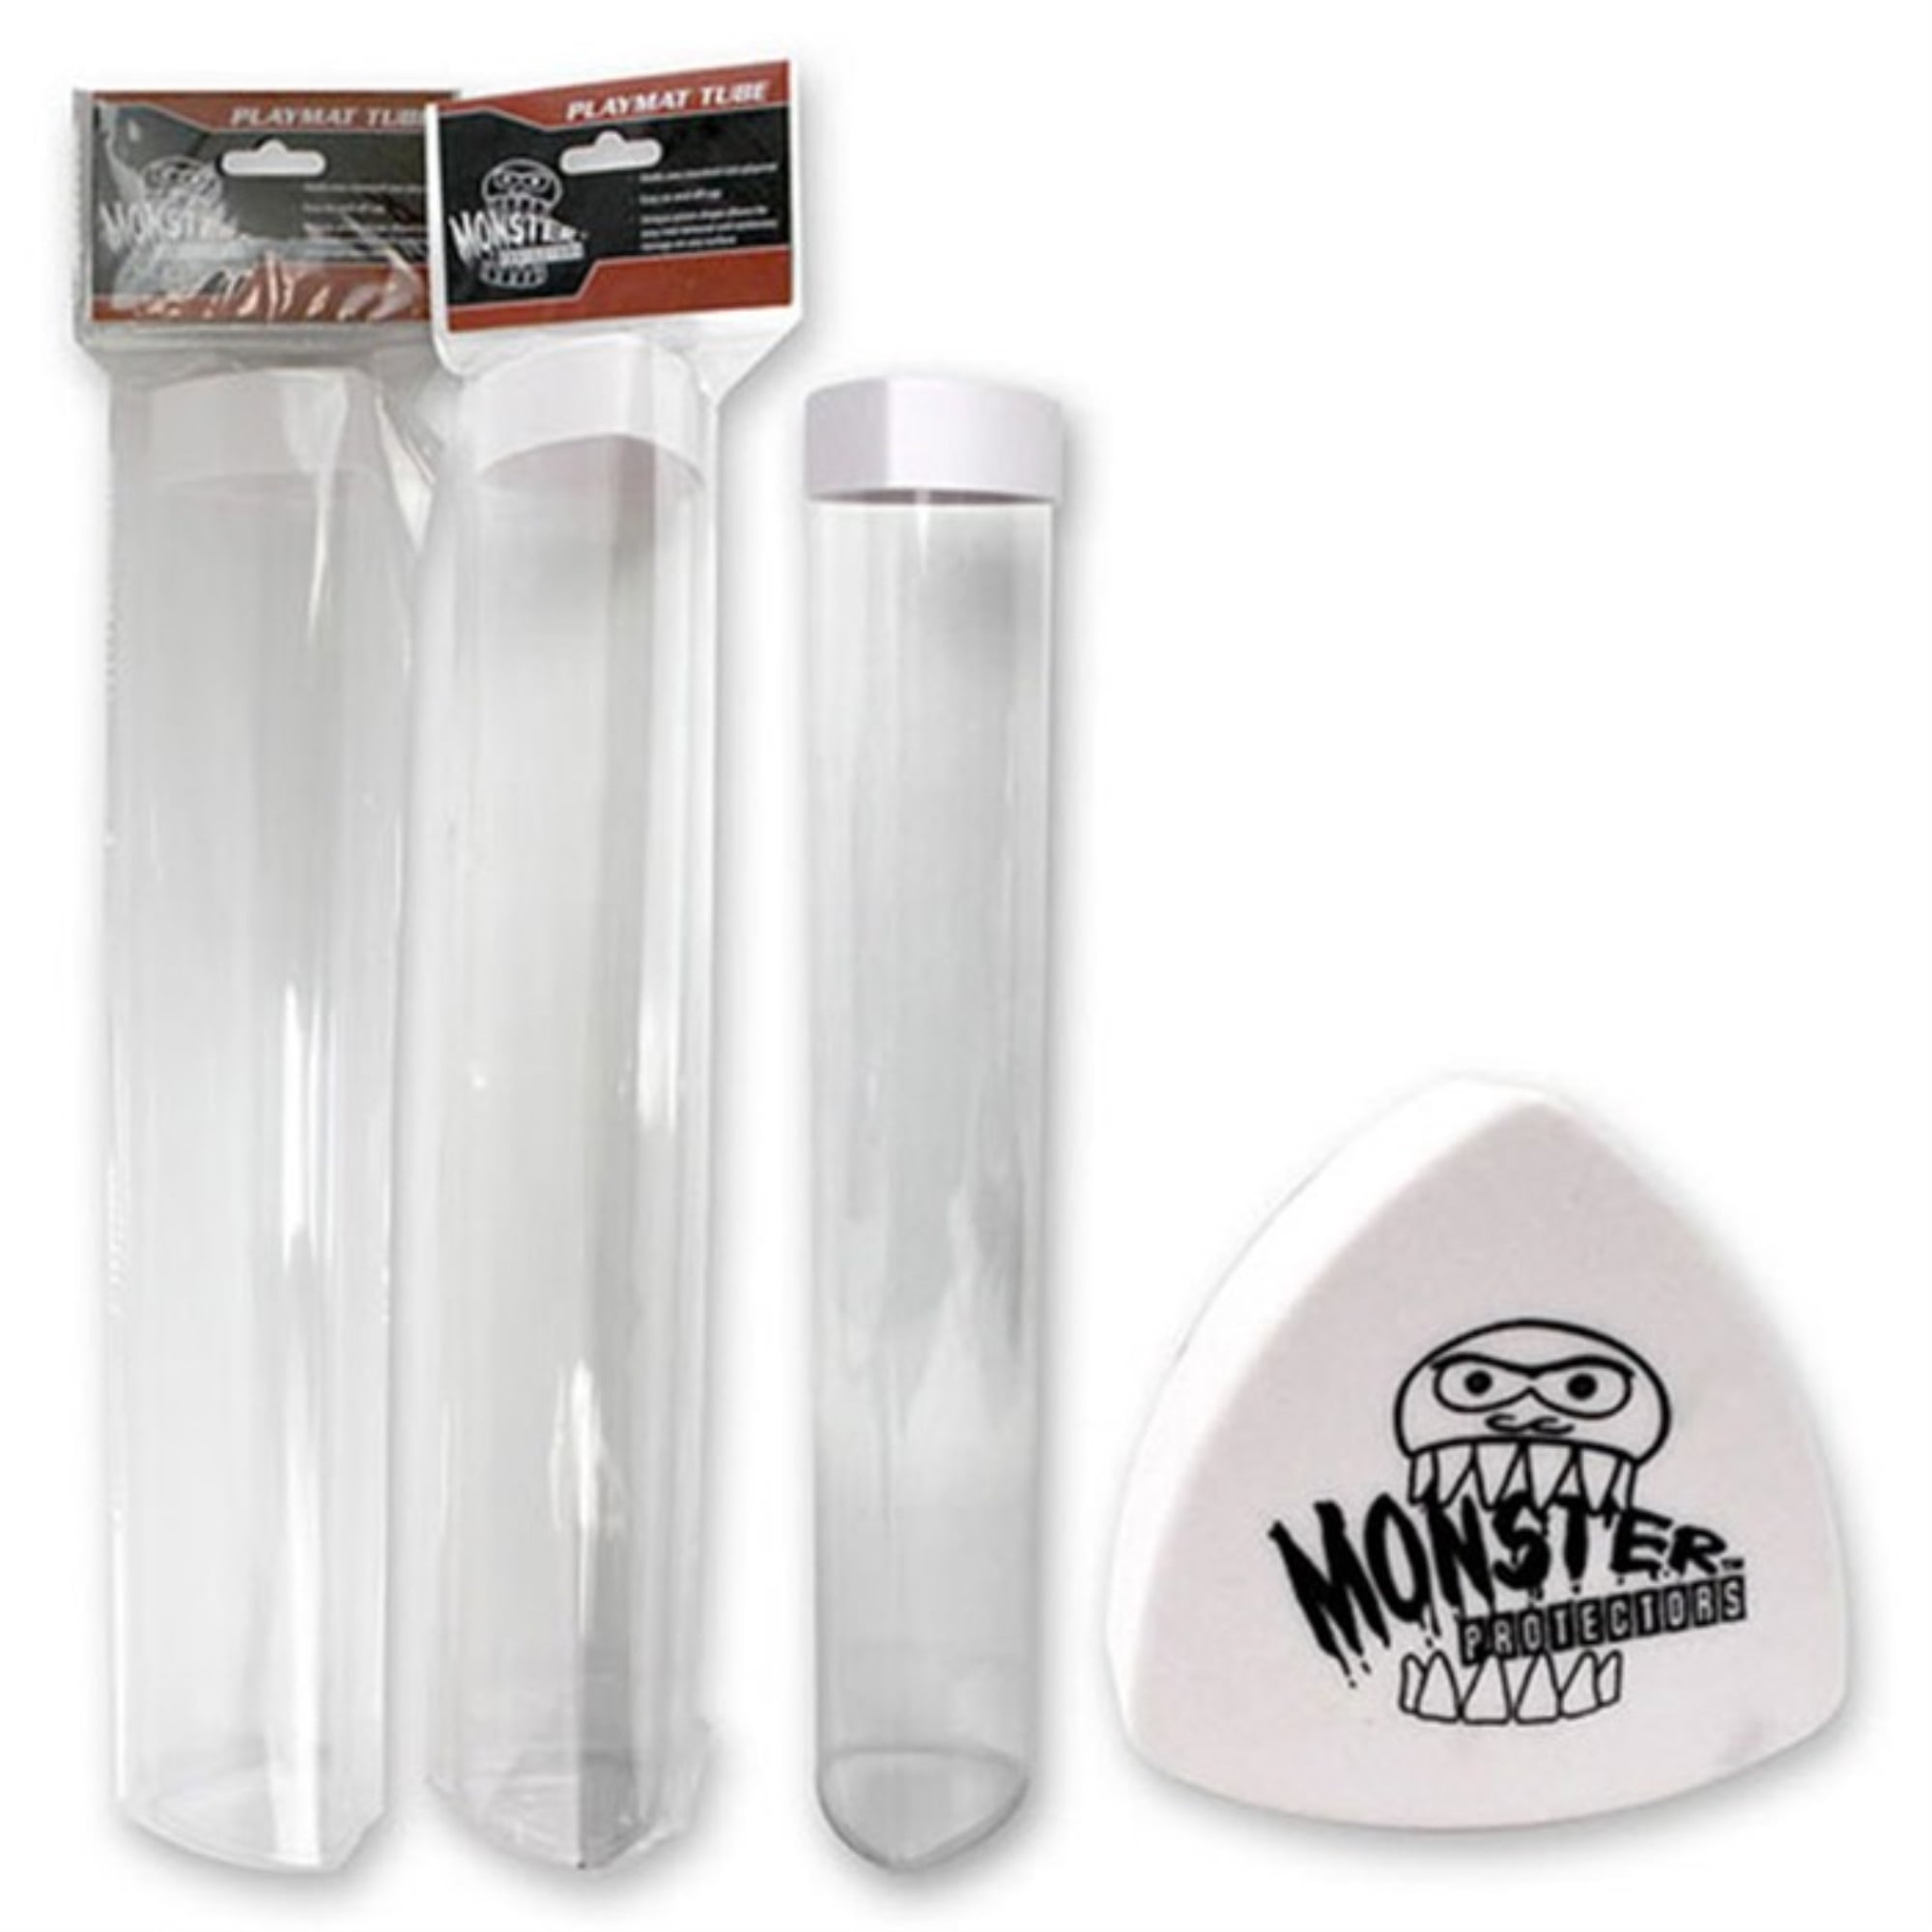 Dual Playmat Tube - Monster Protectors Prism-Shaped Play Case Mat, White